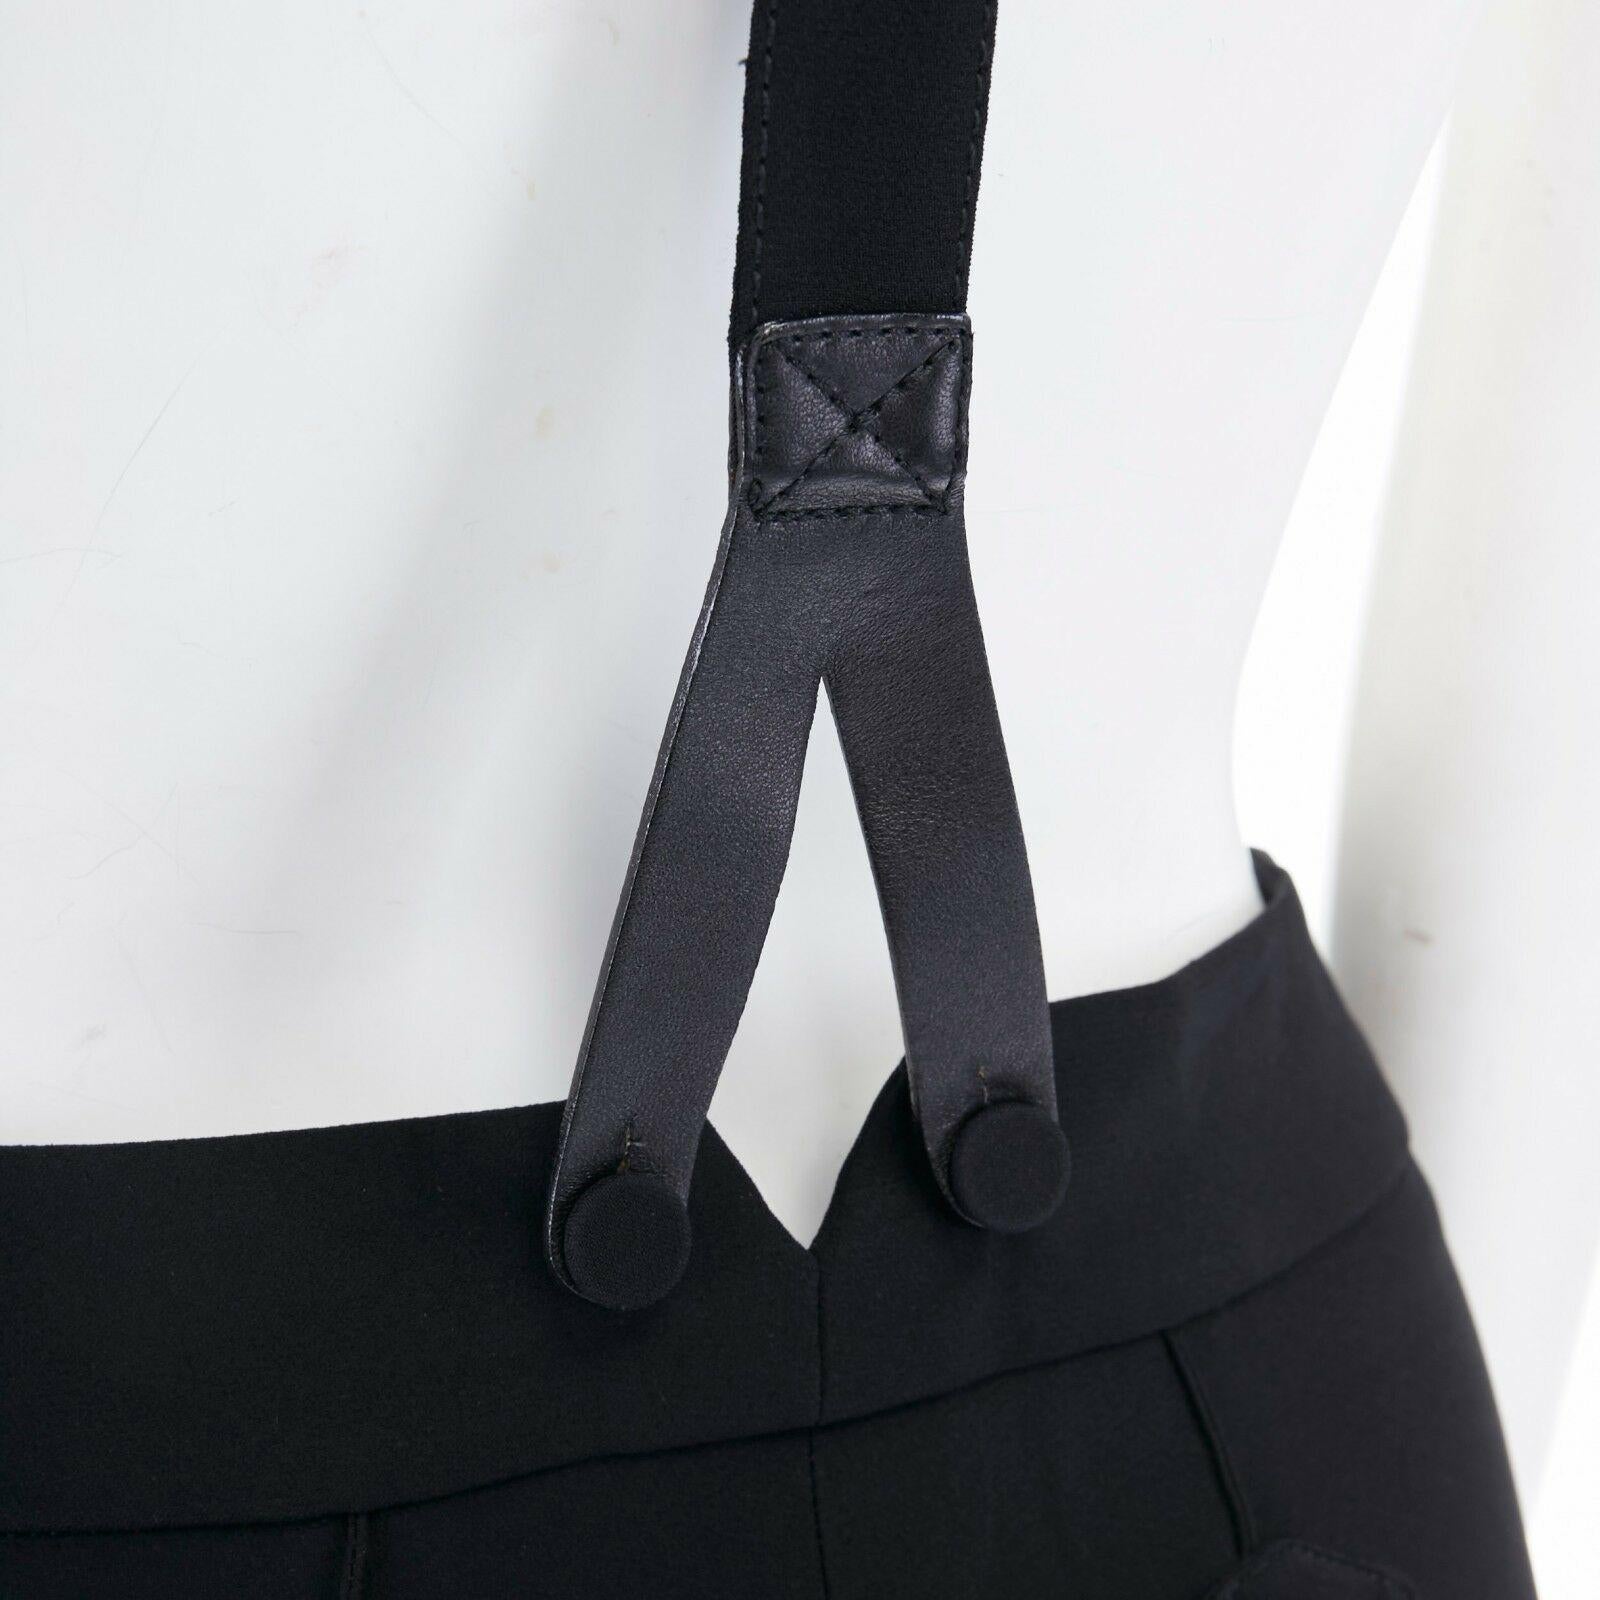 new ALEXANDER MCQUEEN Runway SS07 suspender braces cropped dungaree pants IT40
ALEXANDER MCQUEEN
FROM THE SPRING SUMMER 2007 COLLECTION
Acetate, viscose. Detachable suspender braces with leather tabs. 
Adjustable silver hardware buckle. Fabric